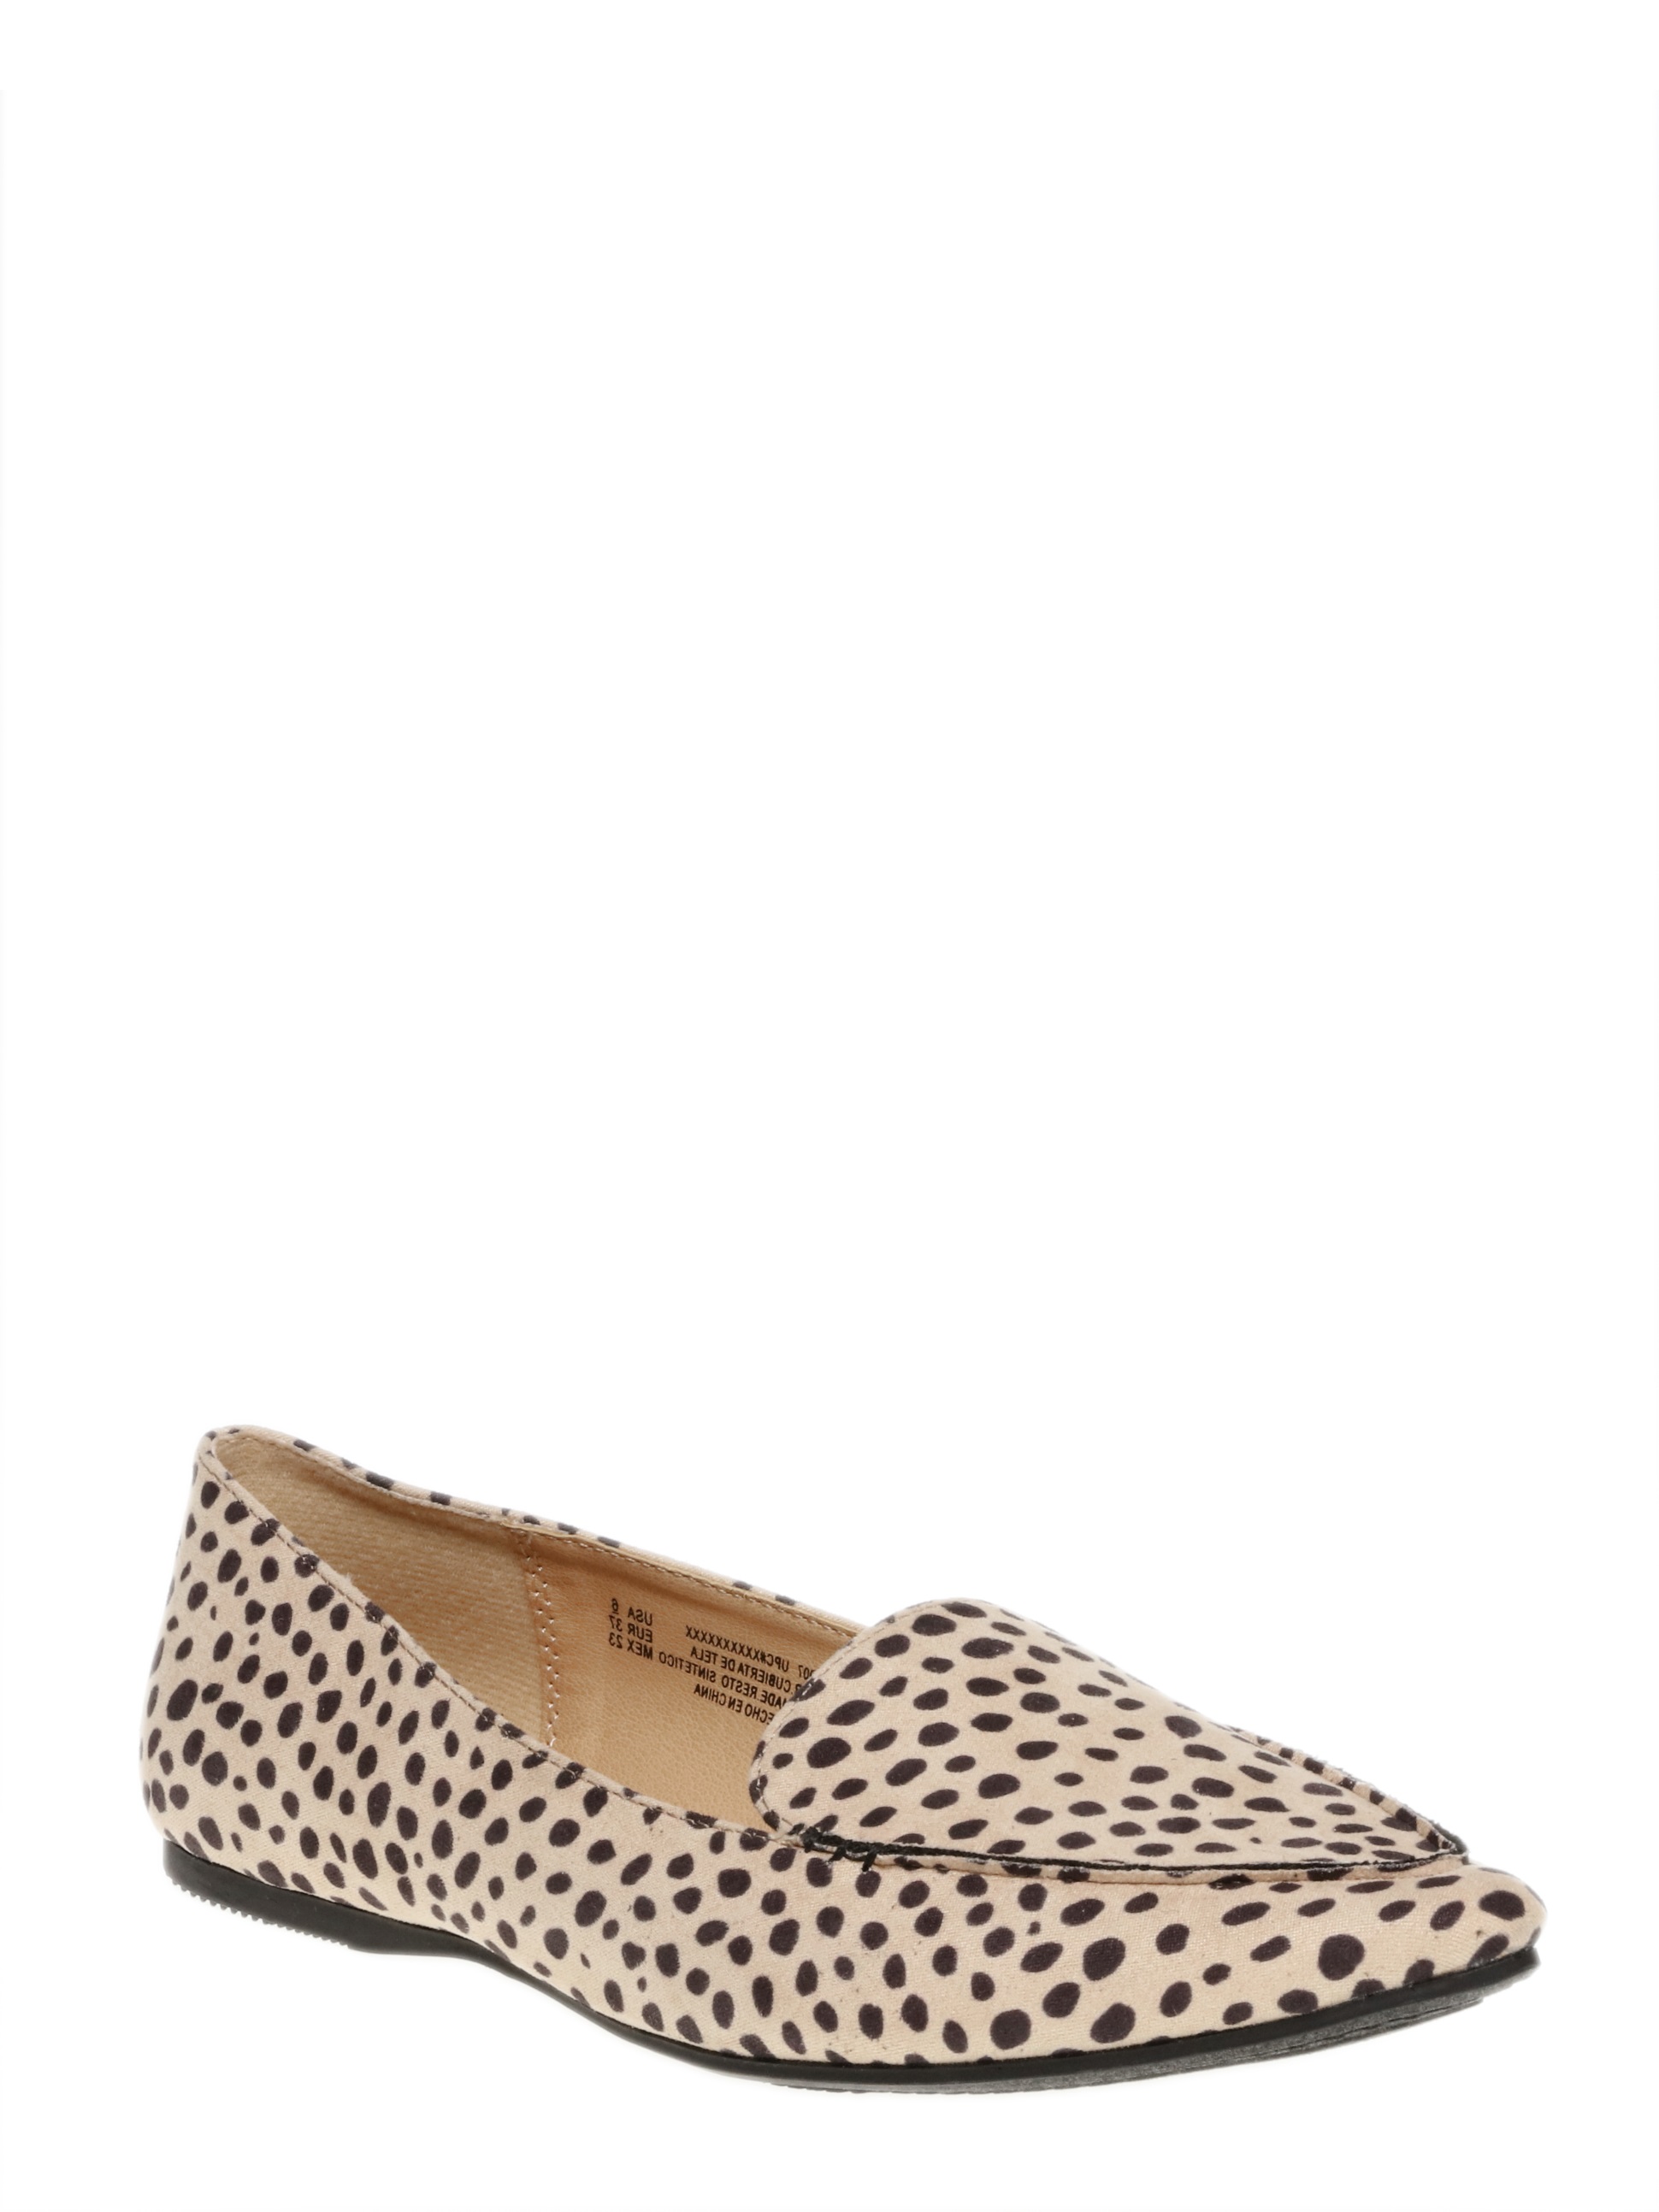 Time and Tru Women’s Animal Print Feather Flats, Wide Width Available - image 1 of 6